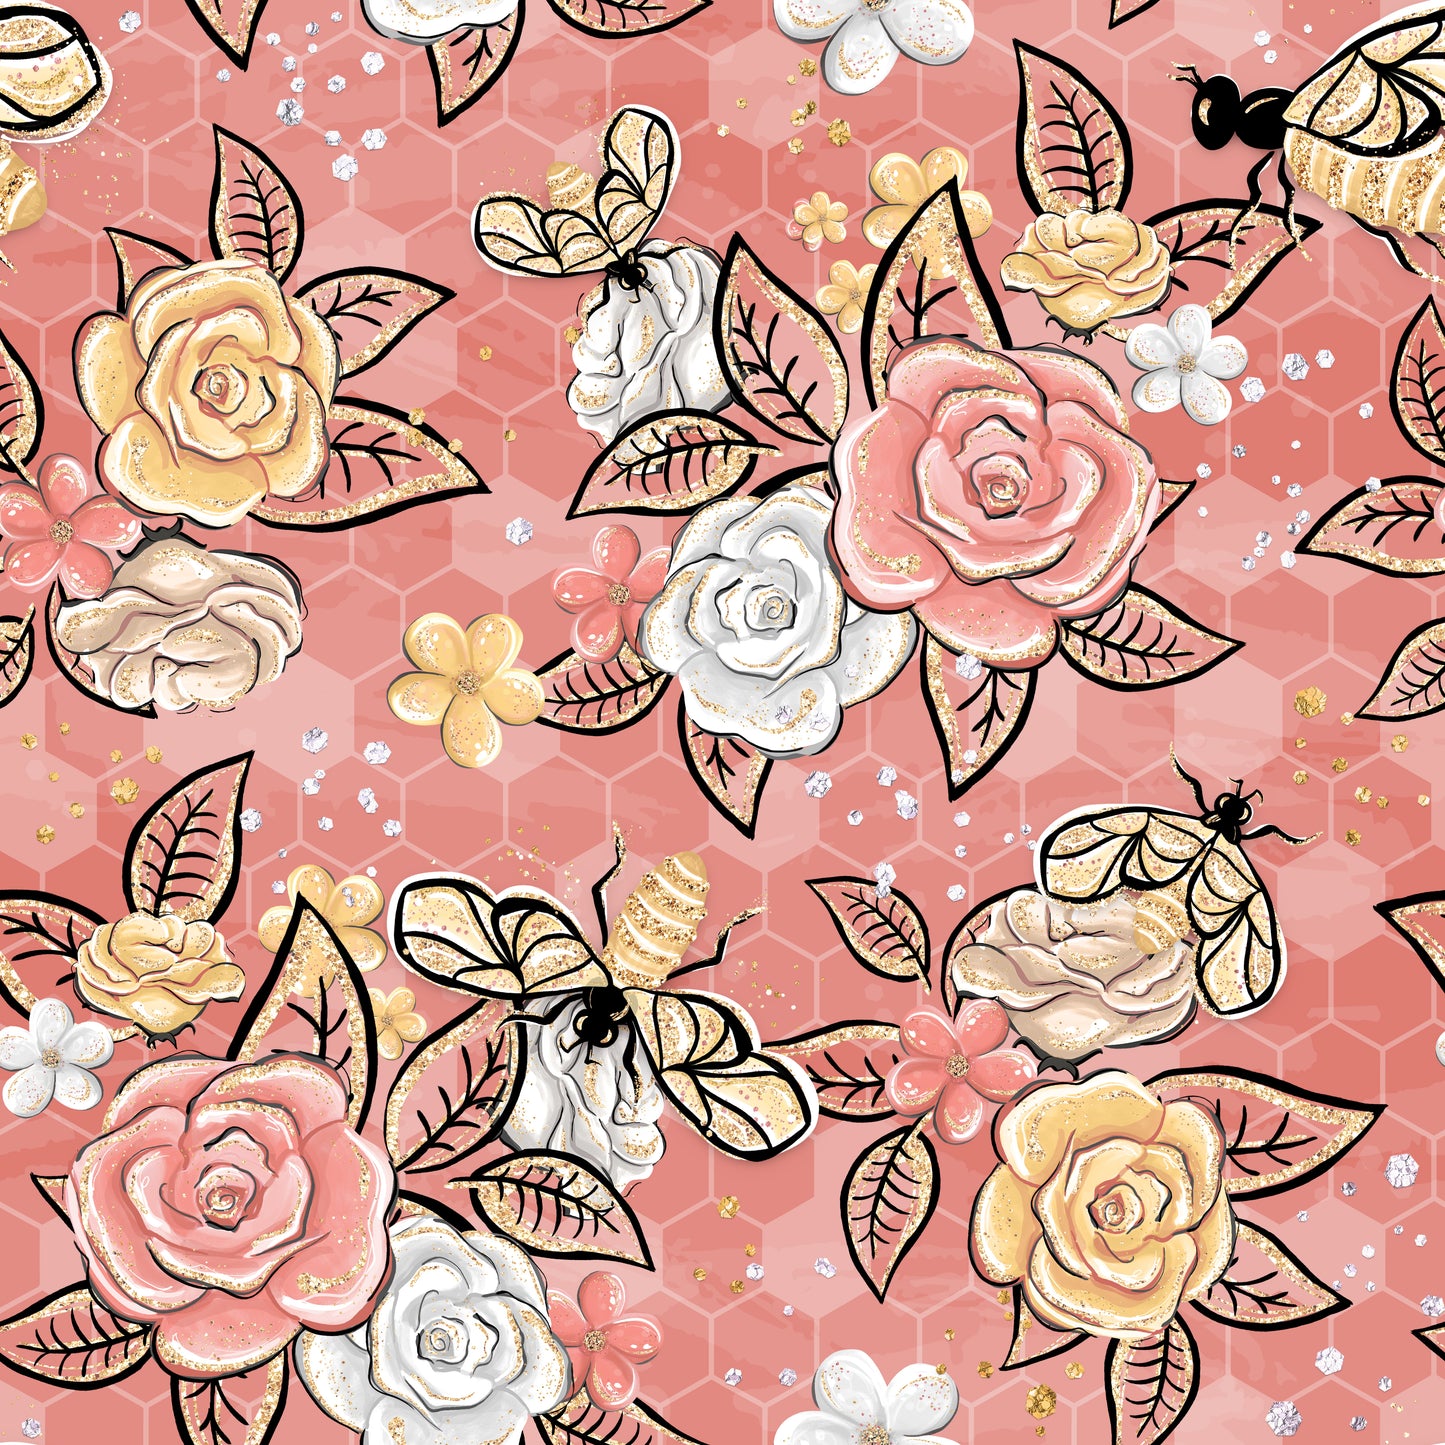 Blush Flowers and Bees